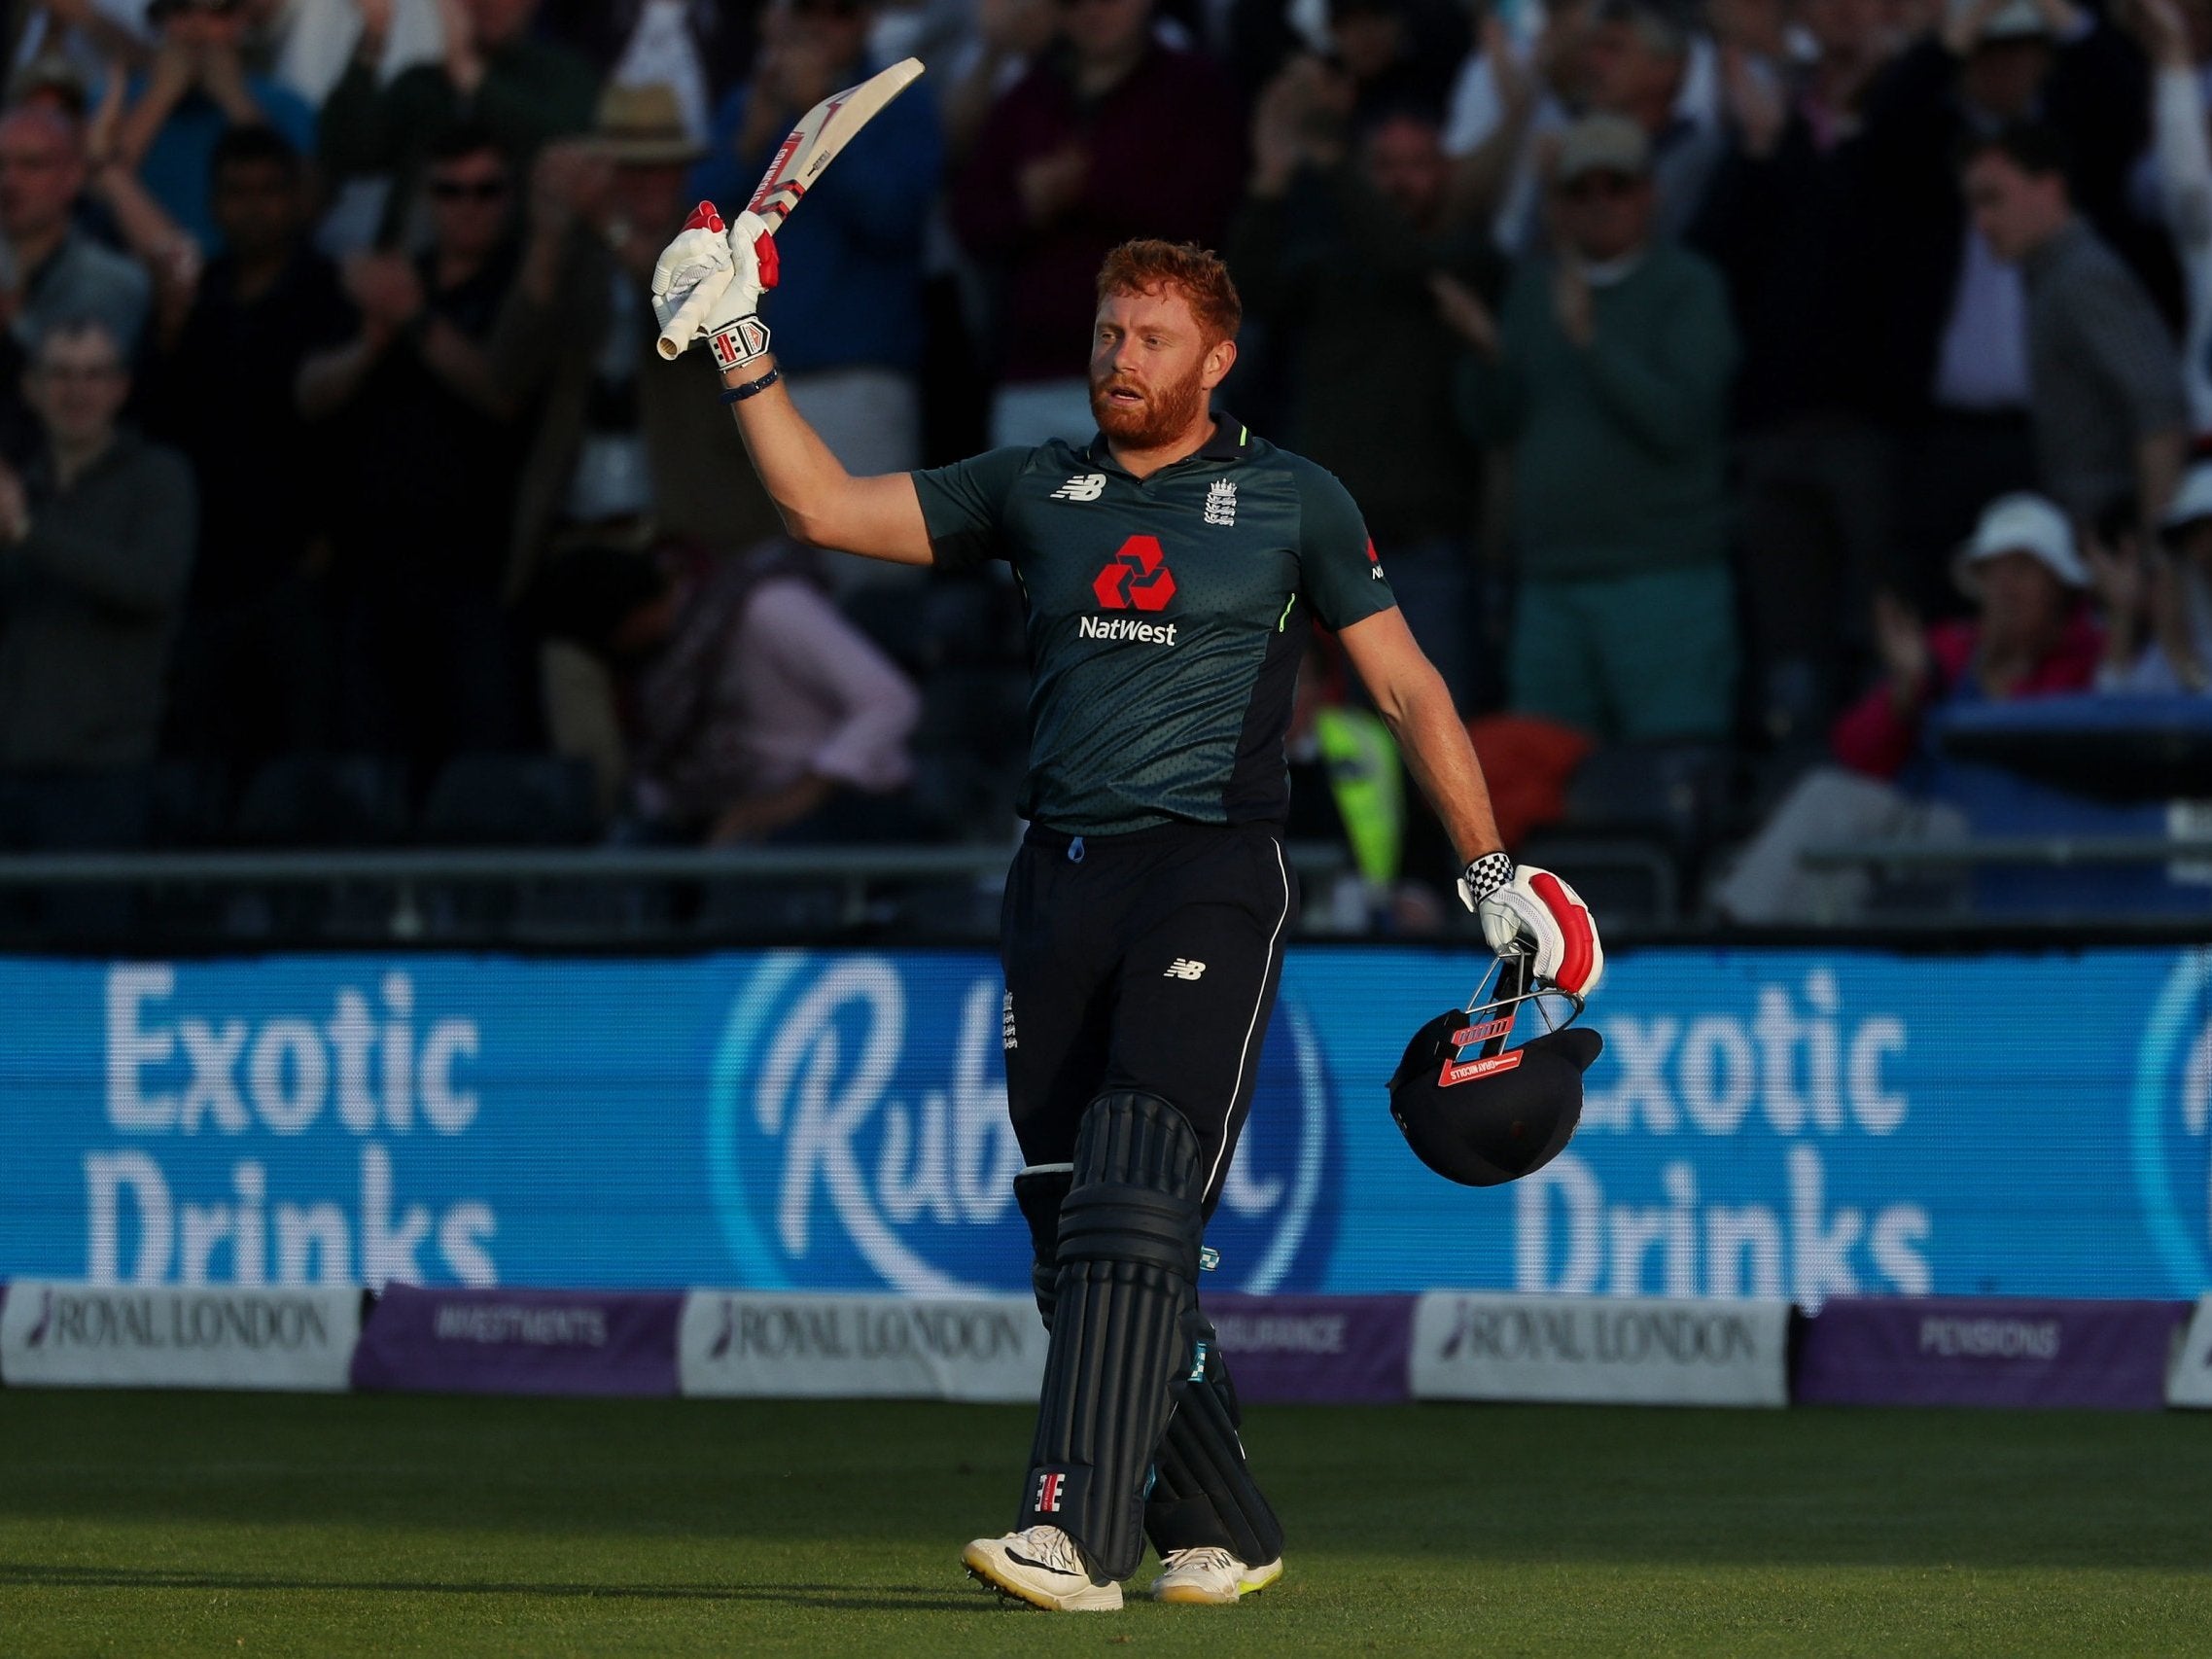 Bairstow continued his rich vein of form in Bristol